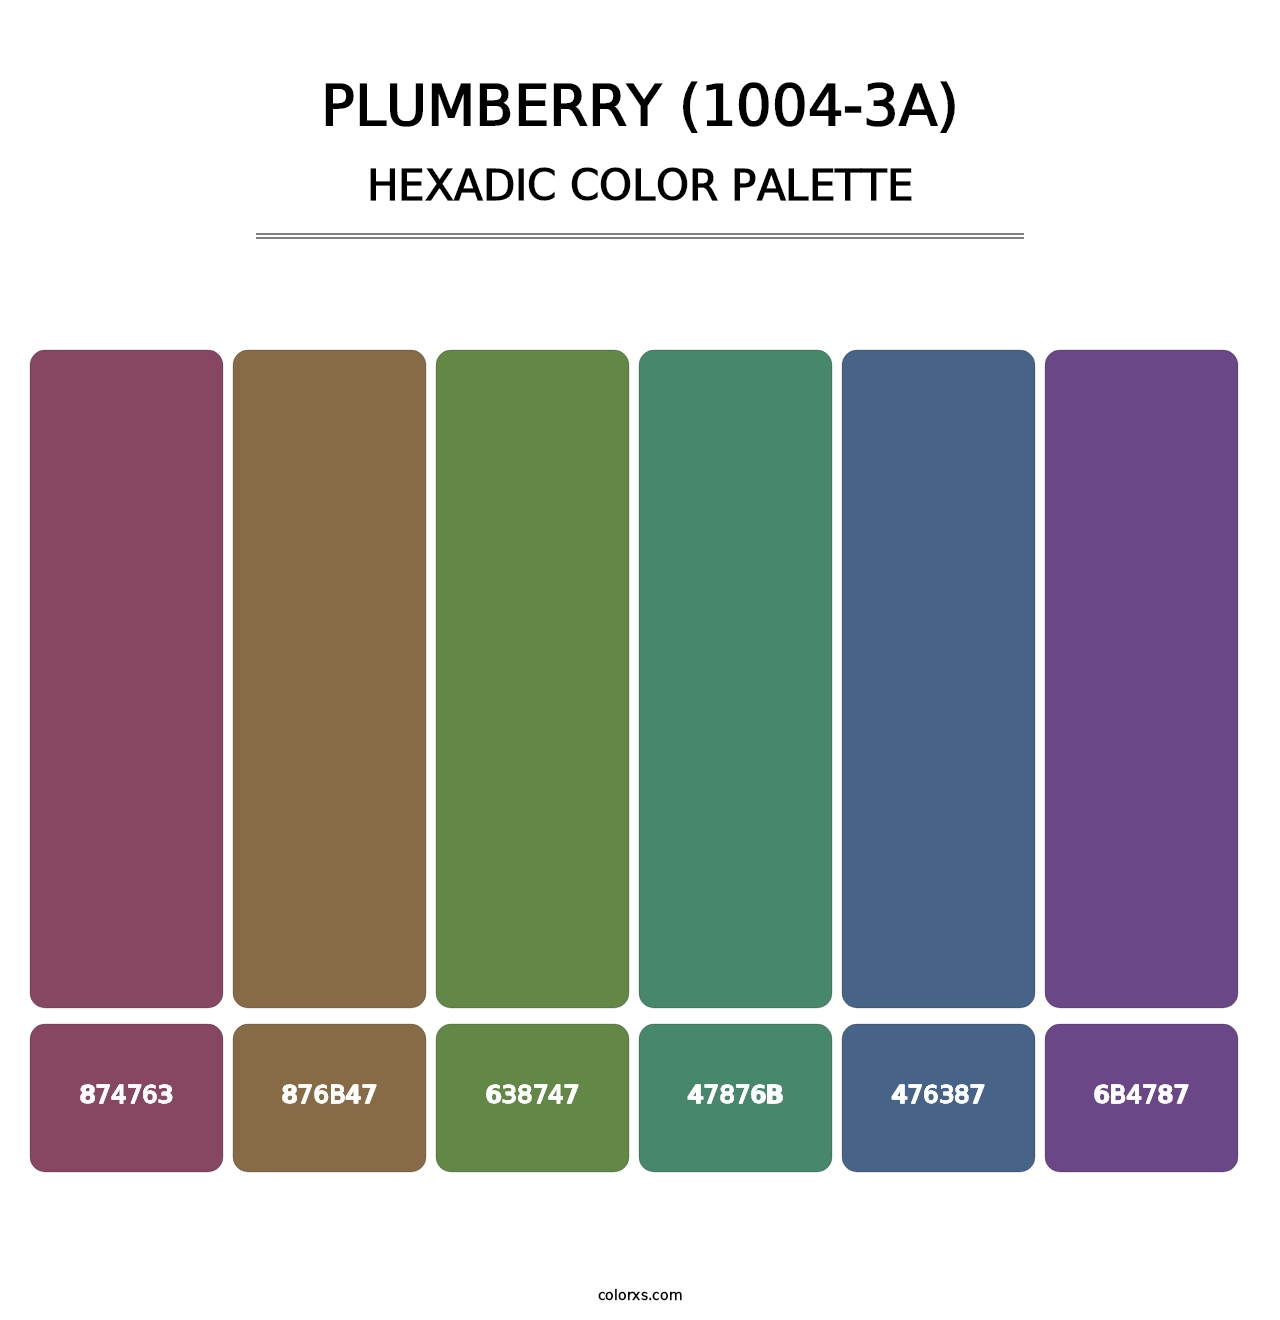 Plumberry (1004-3A) - Hexadic Color Palette